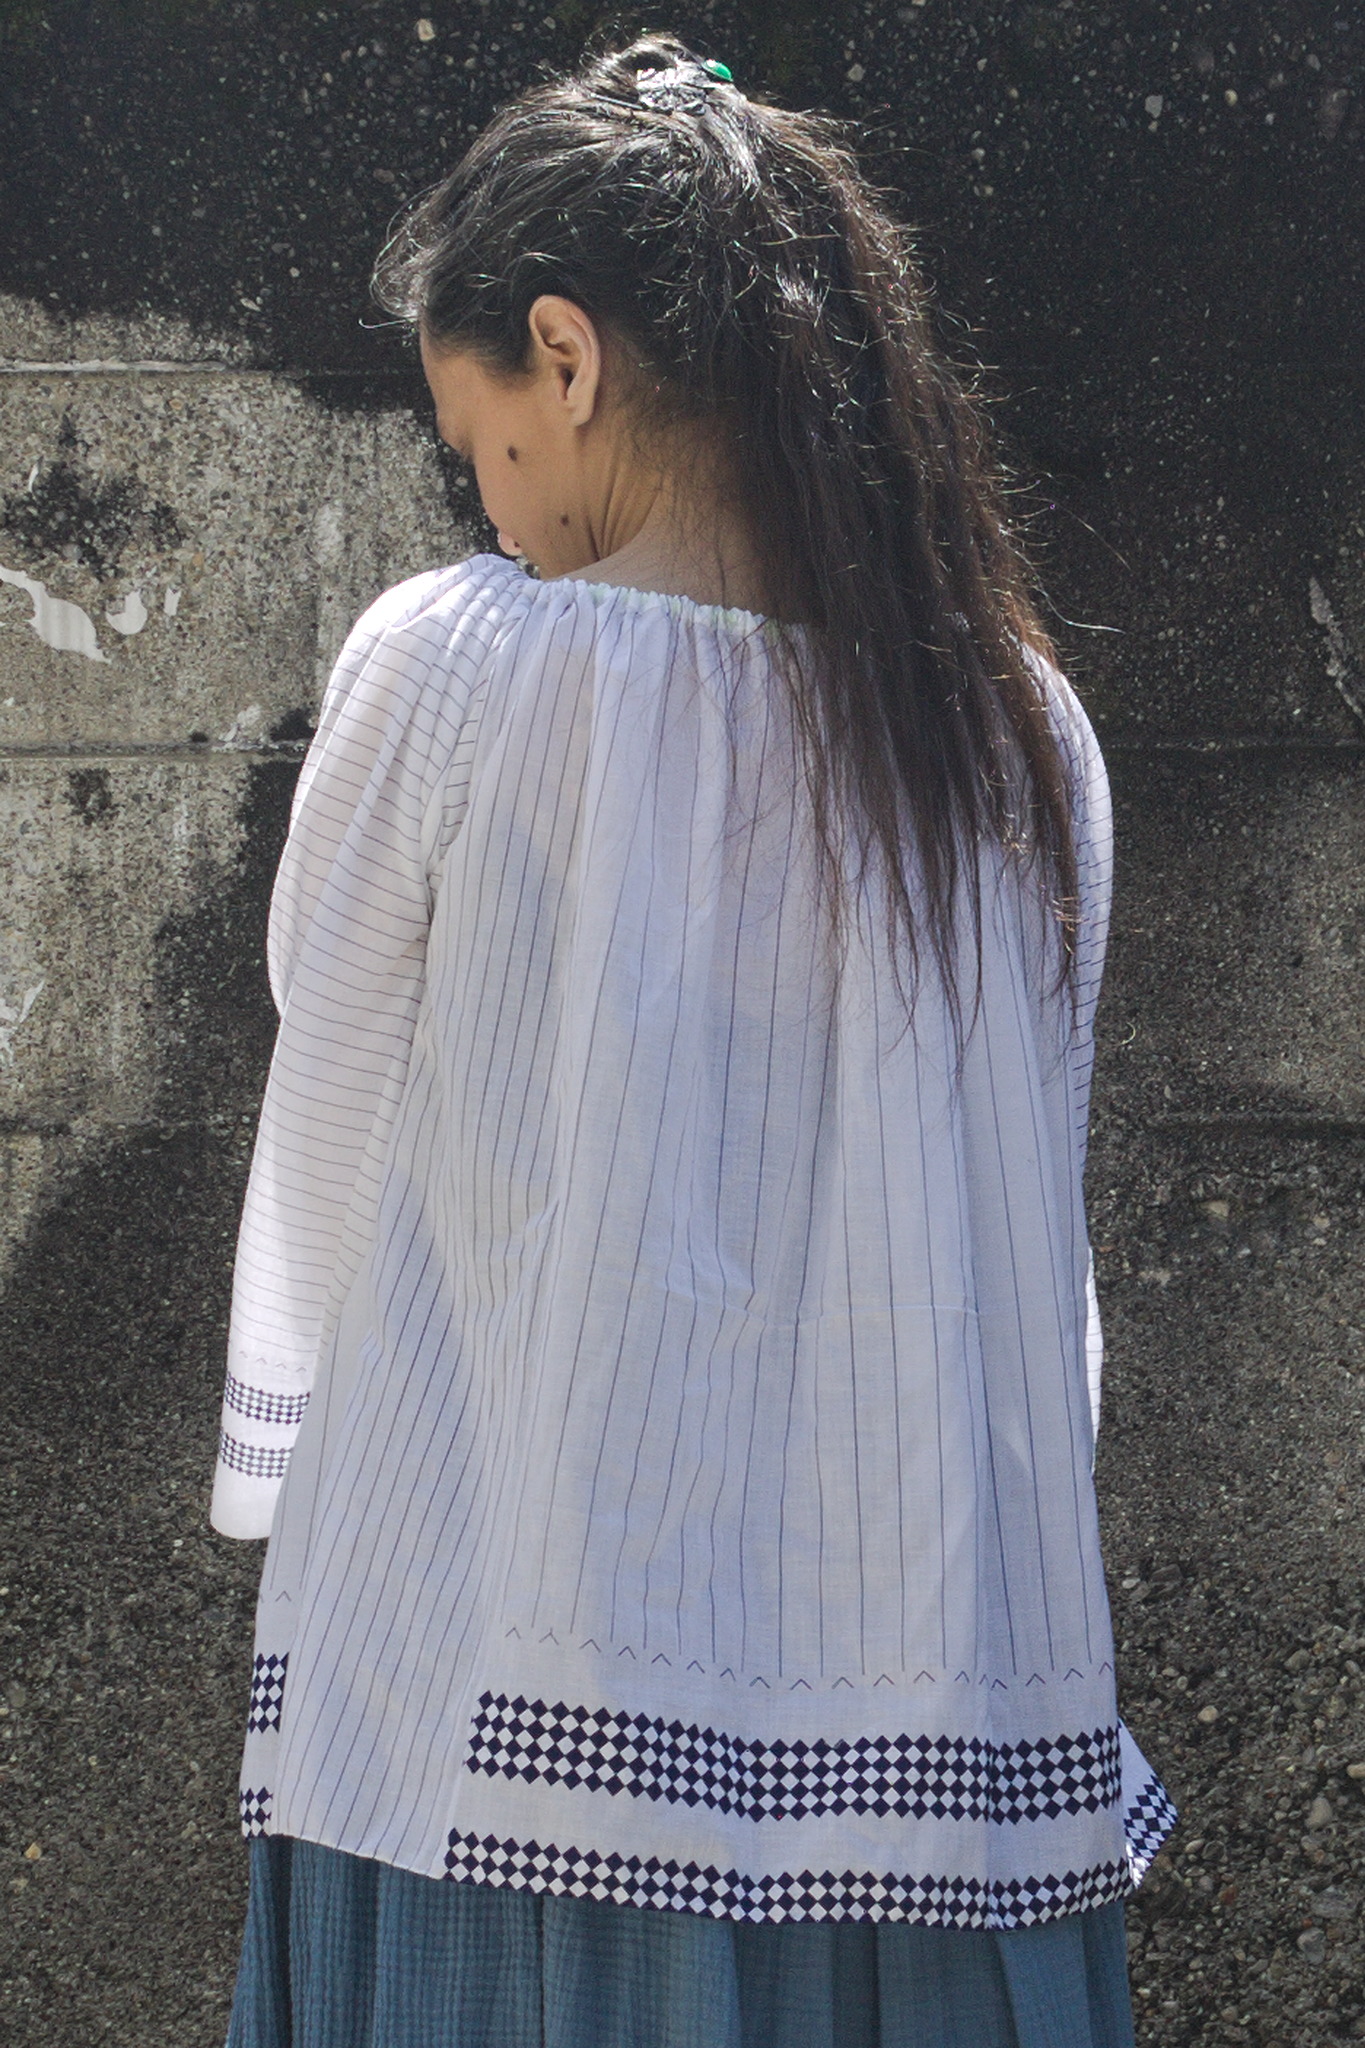 The worn top shown from the side back: there is a strip of
vertical lines spaced closer together like on the sleeves, and
it continues to the bottom rather than ending with a strip of
lozenges.